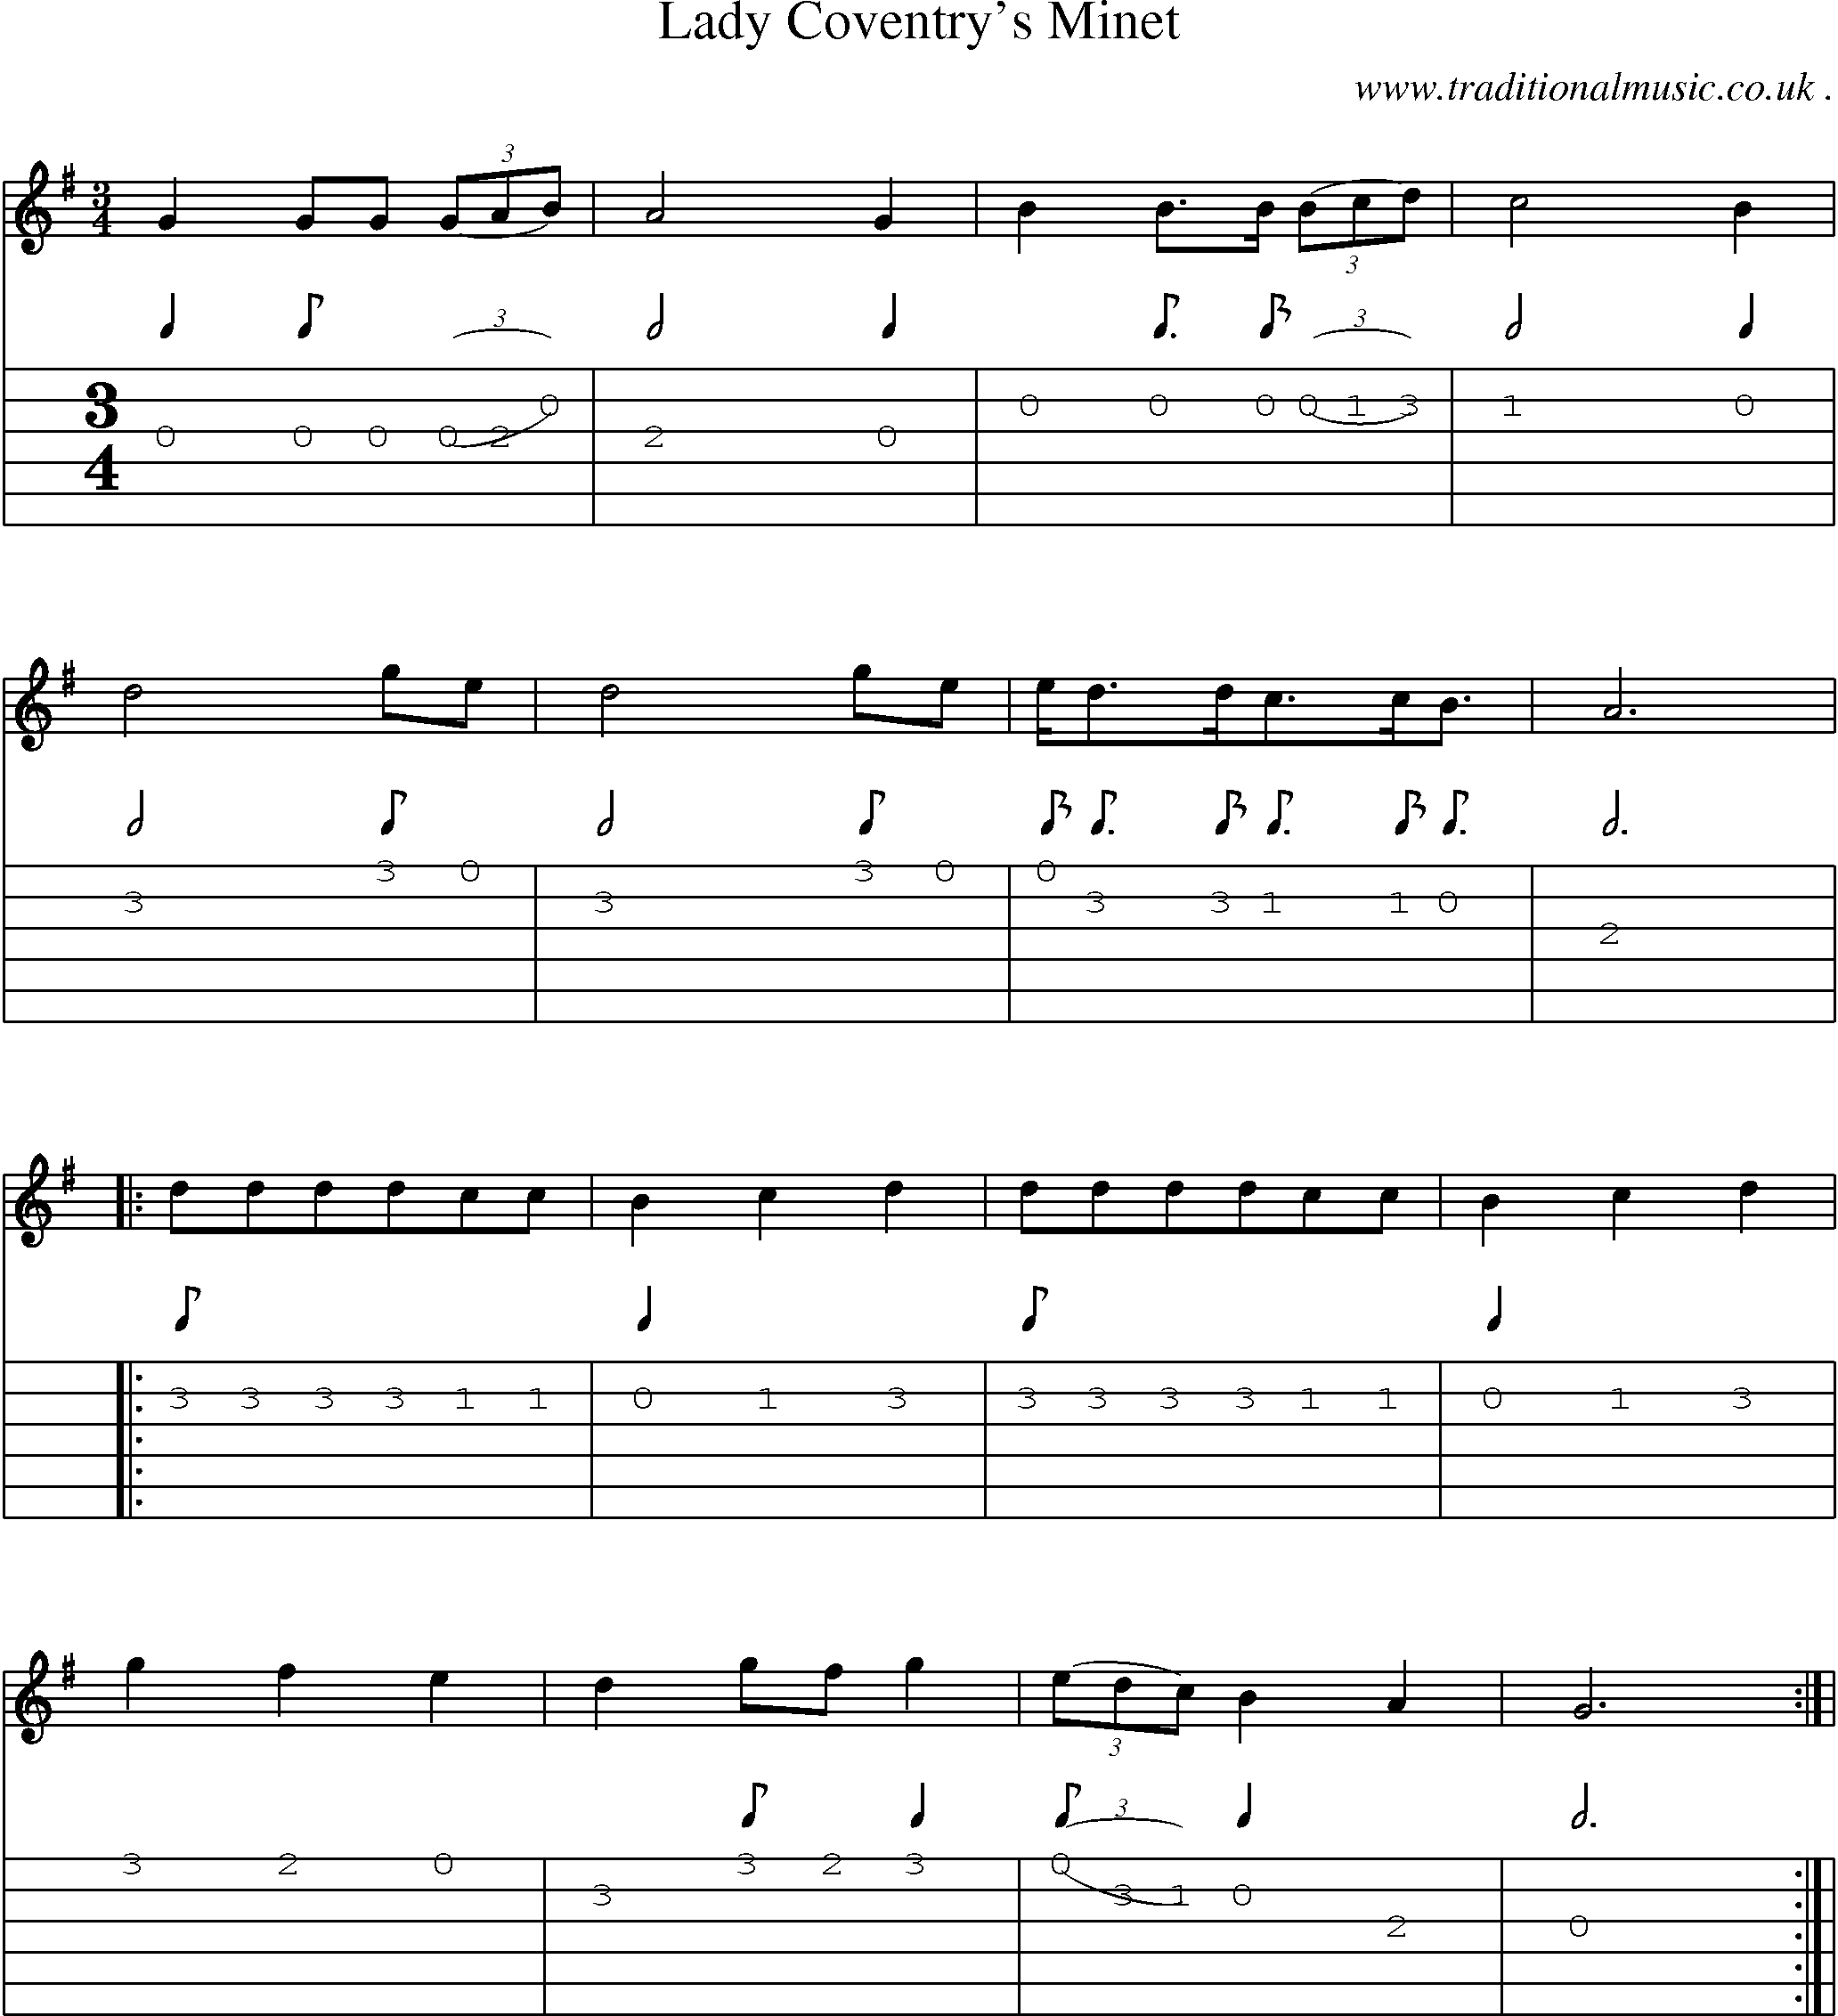 Sheet-Music and Guitar Tabs for Lady Coventrys Minet